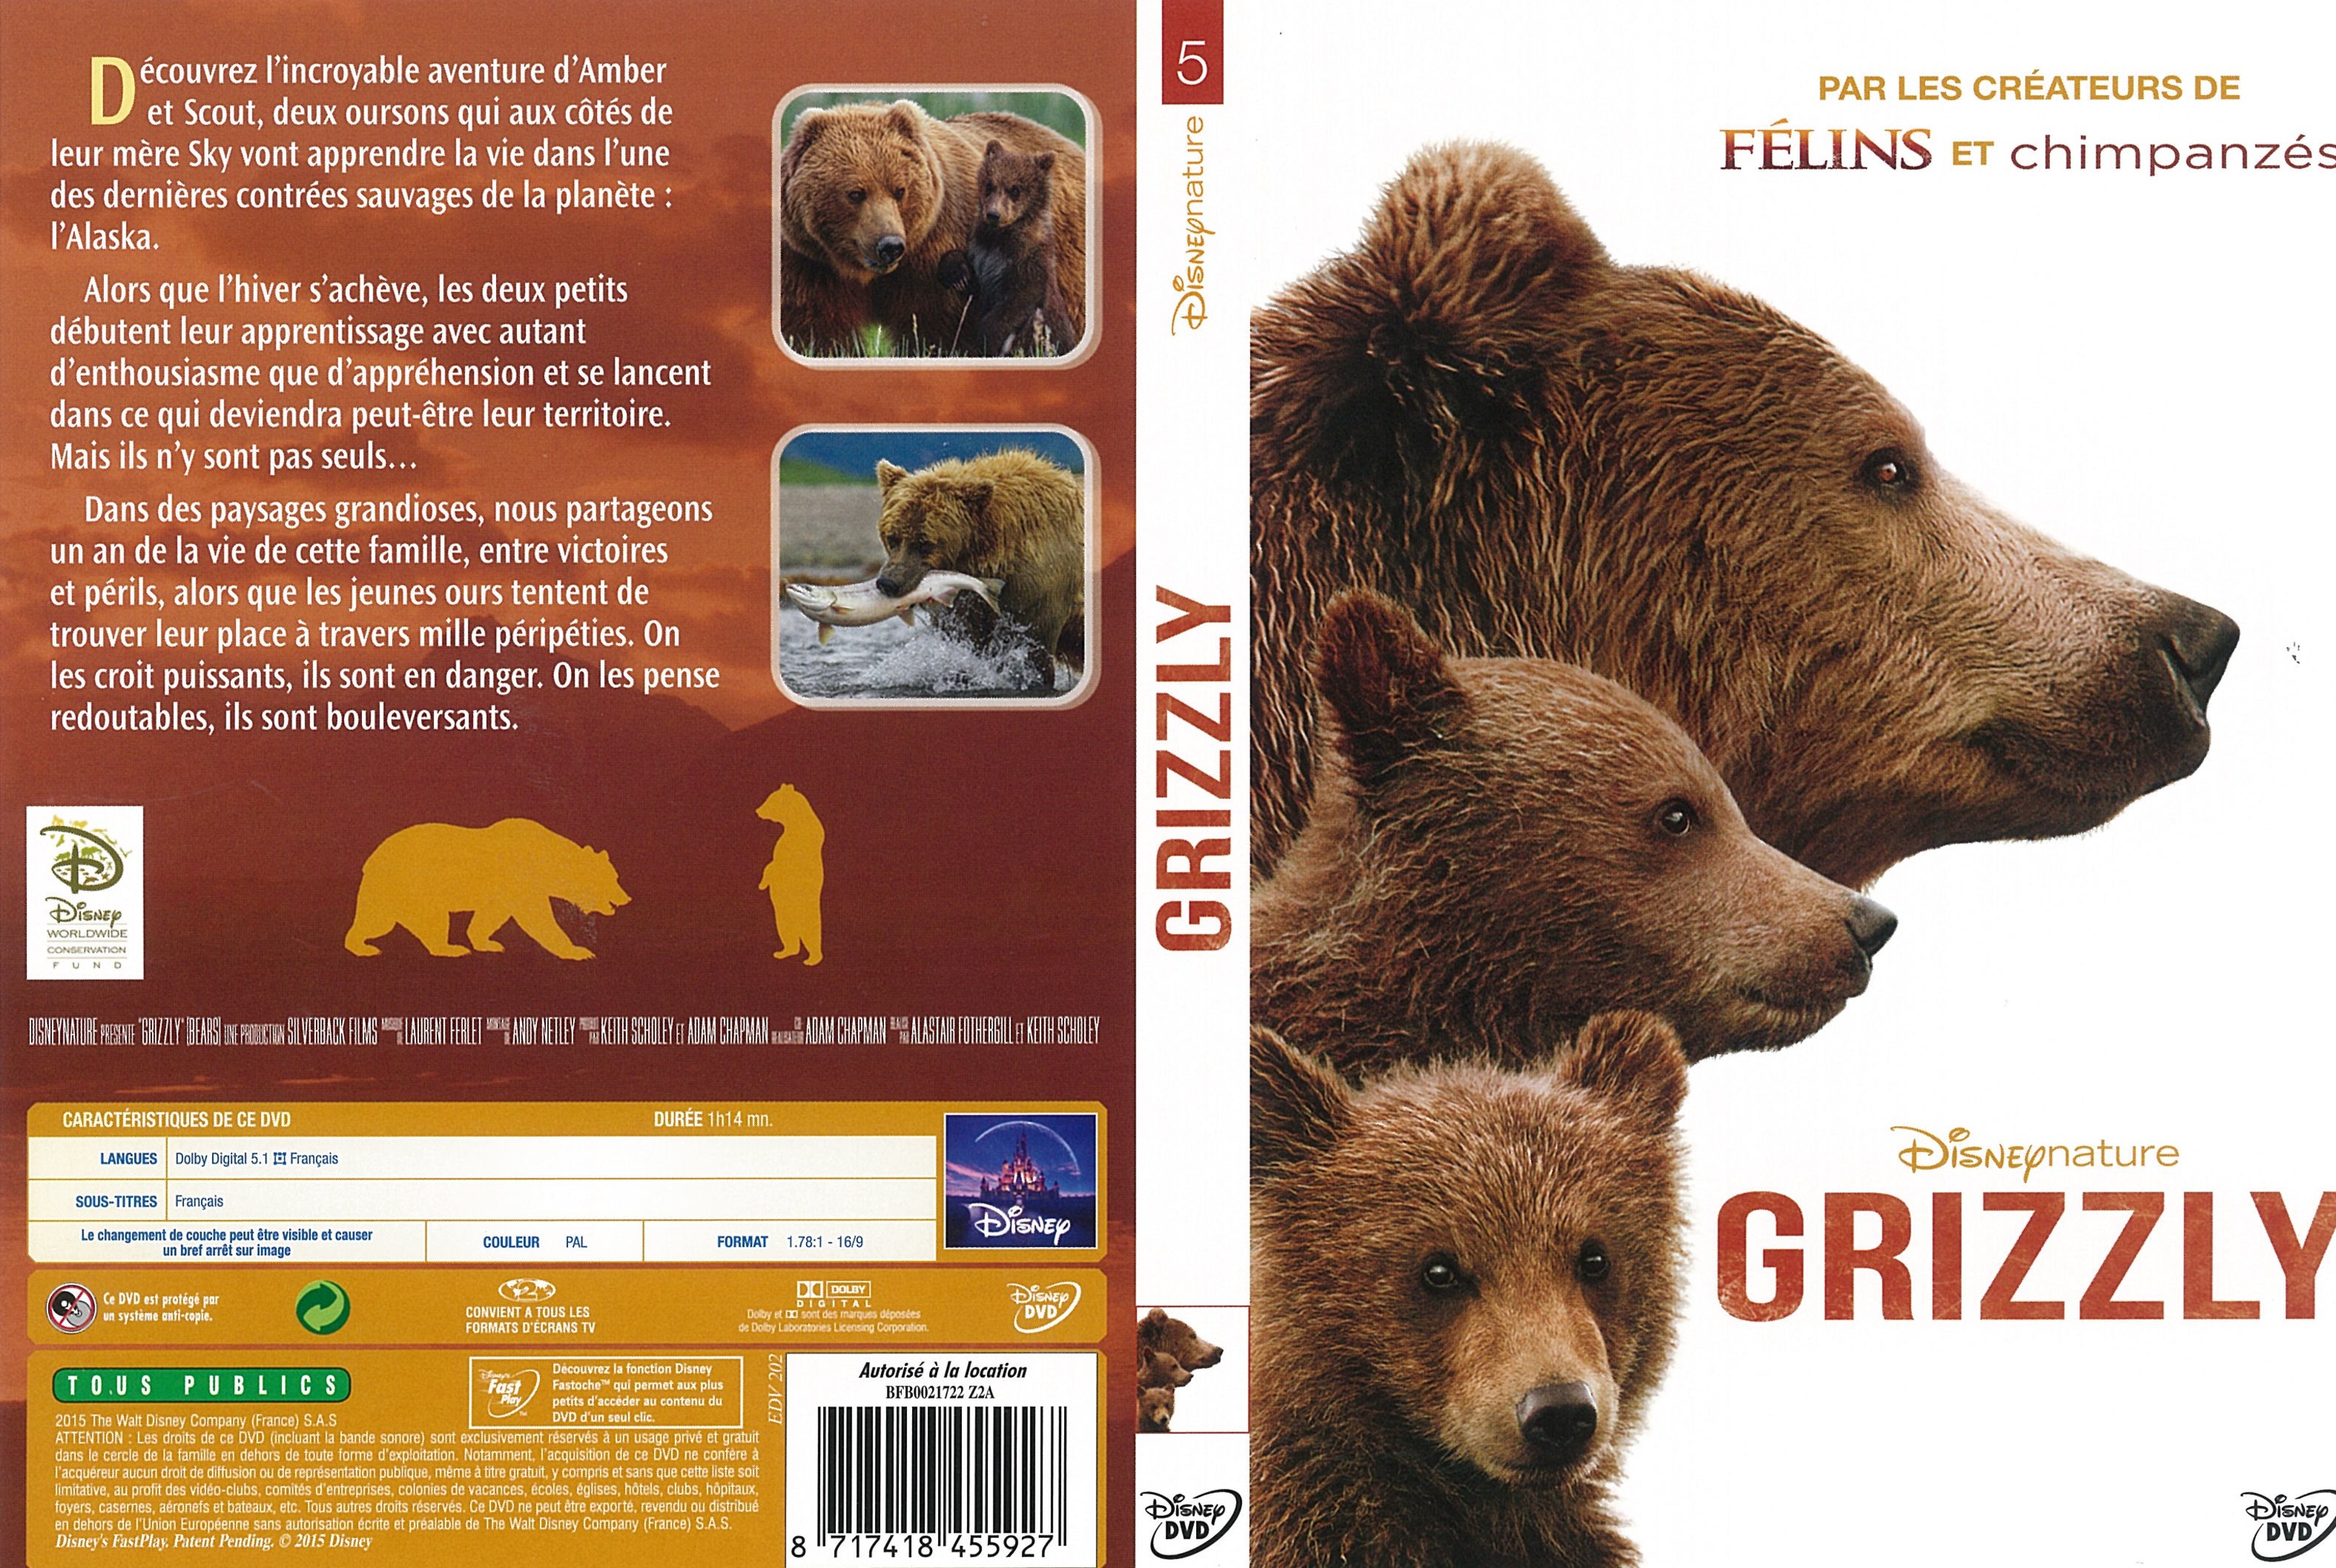 Jaquette DVD Grizzly (Disney)